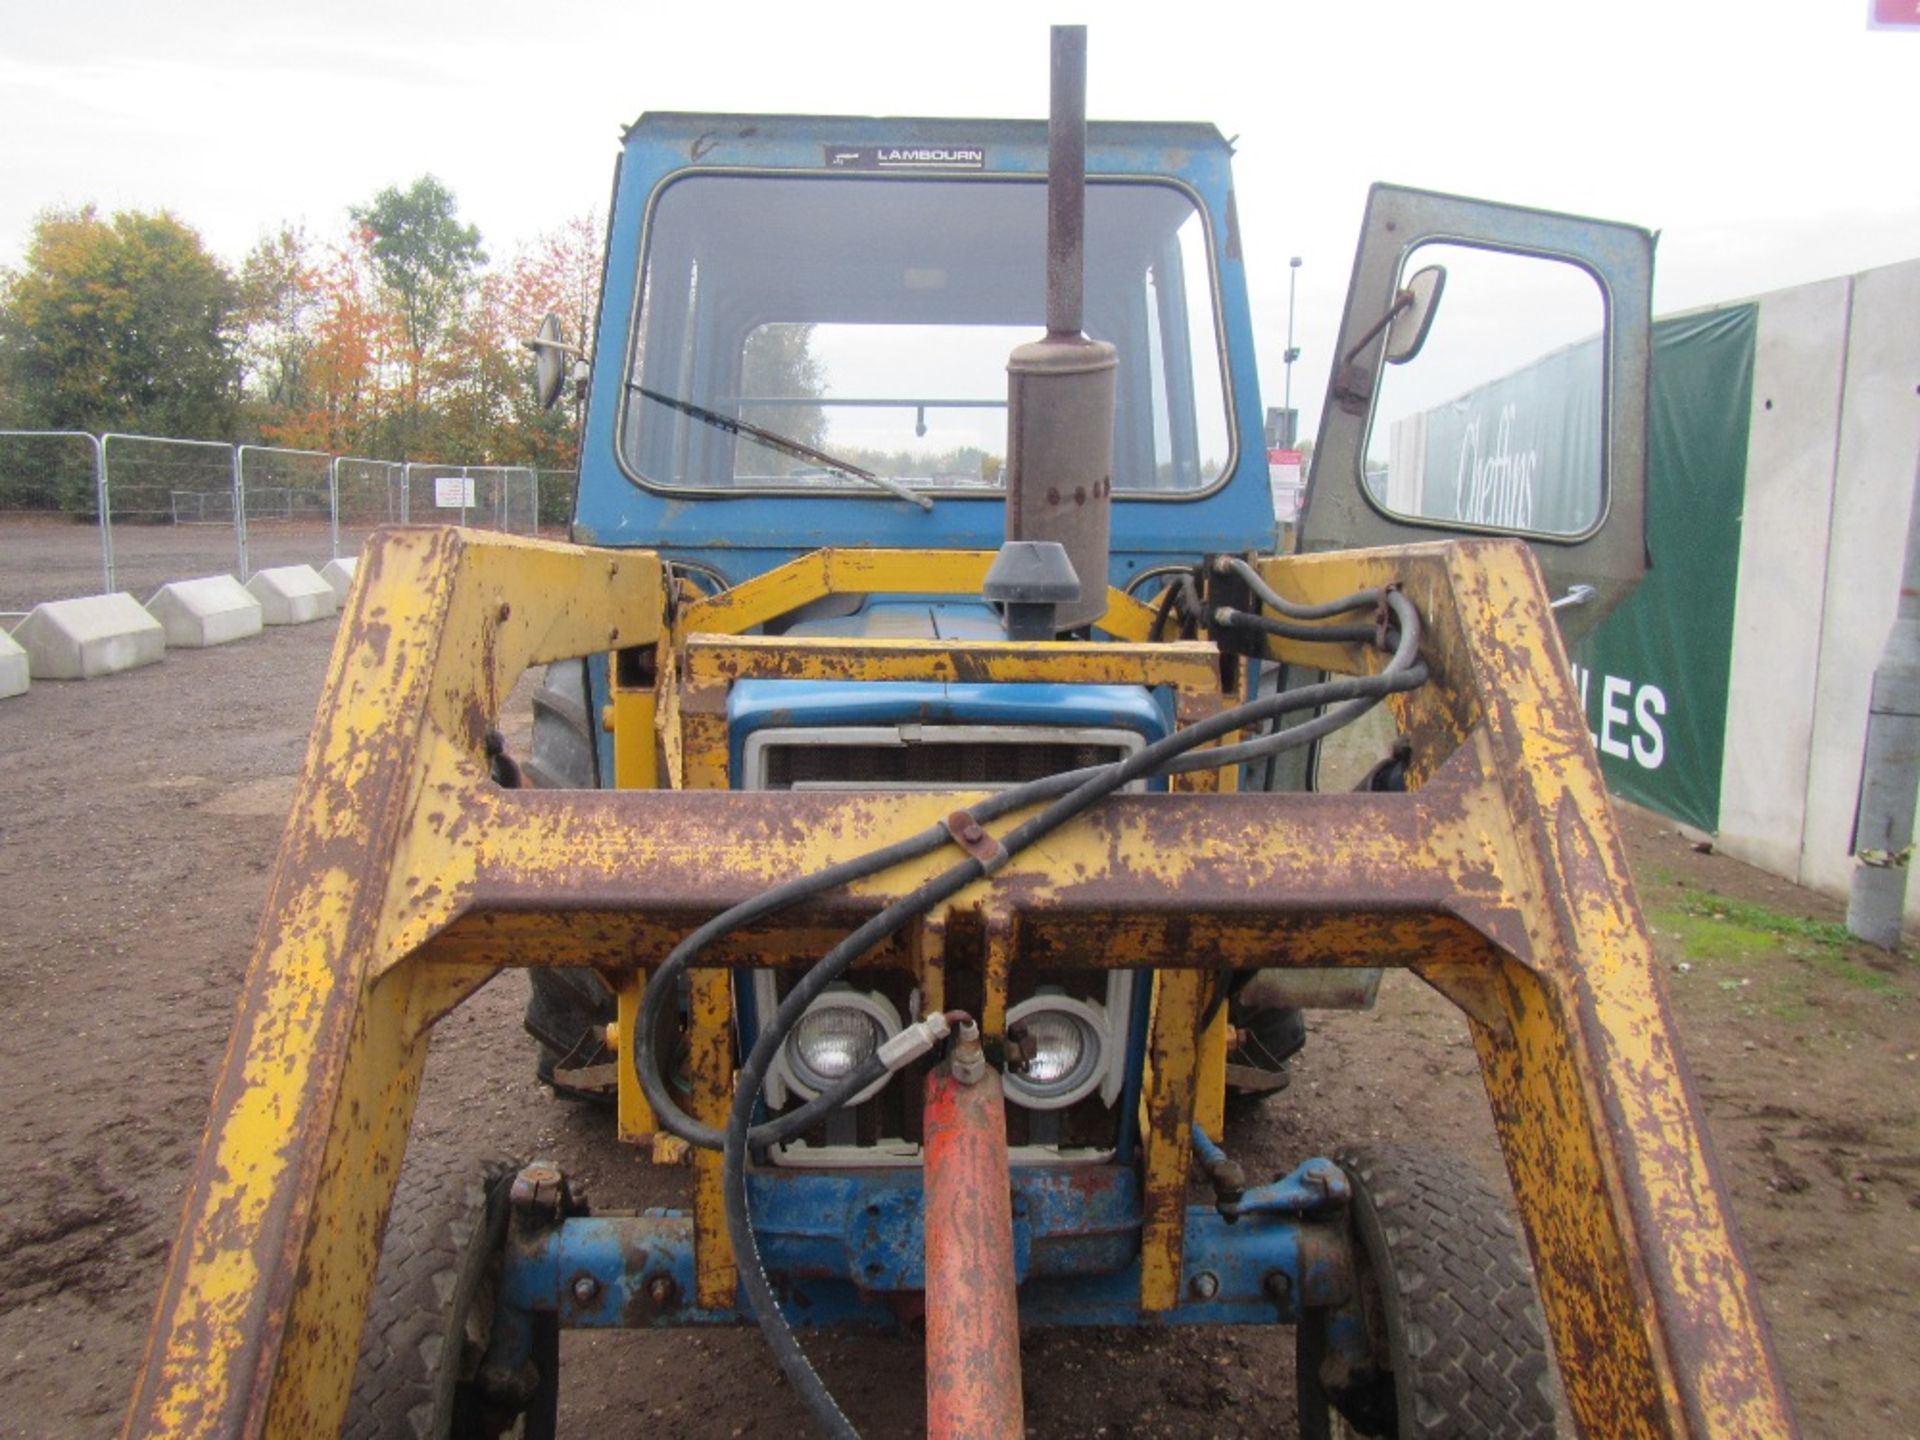 1979 Ford 4600 Tractor. Loader, Power Steering, Bucket, 14.9R28 Tyres. 2887 hrs. Ser No B999392 - Image 3 of 18